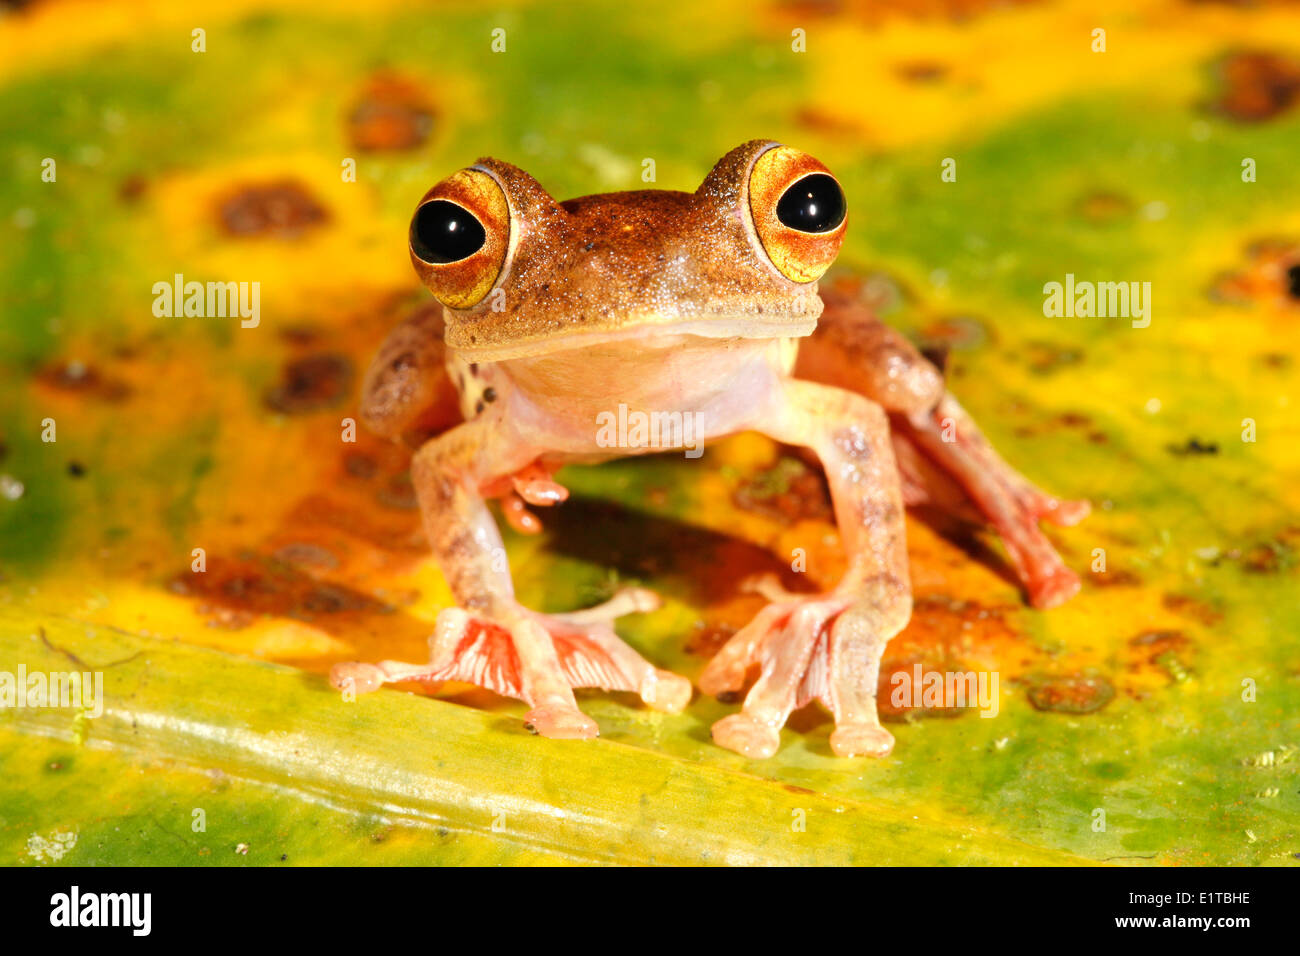 Photo of a harlequin tree frog on a dead banana leaf with green, yellow, brown and orange colours Stock Photo